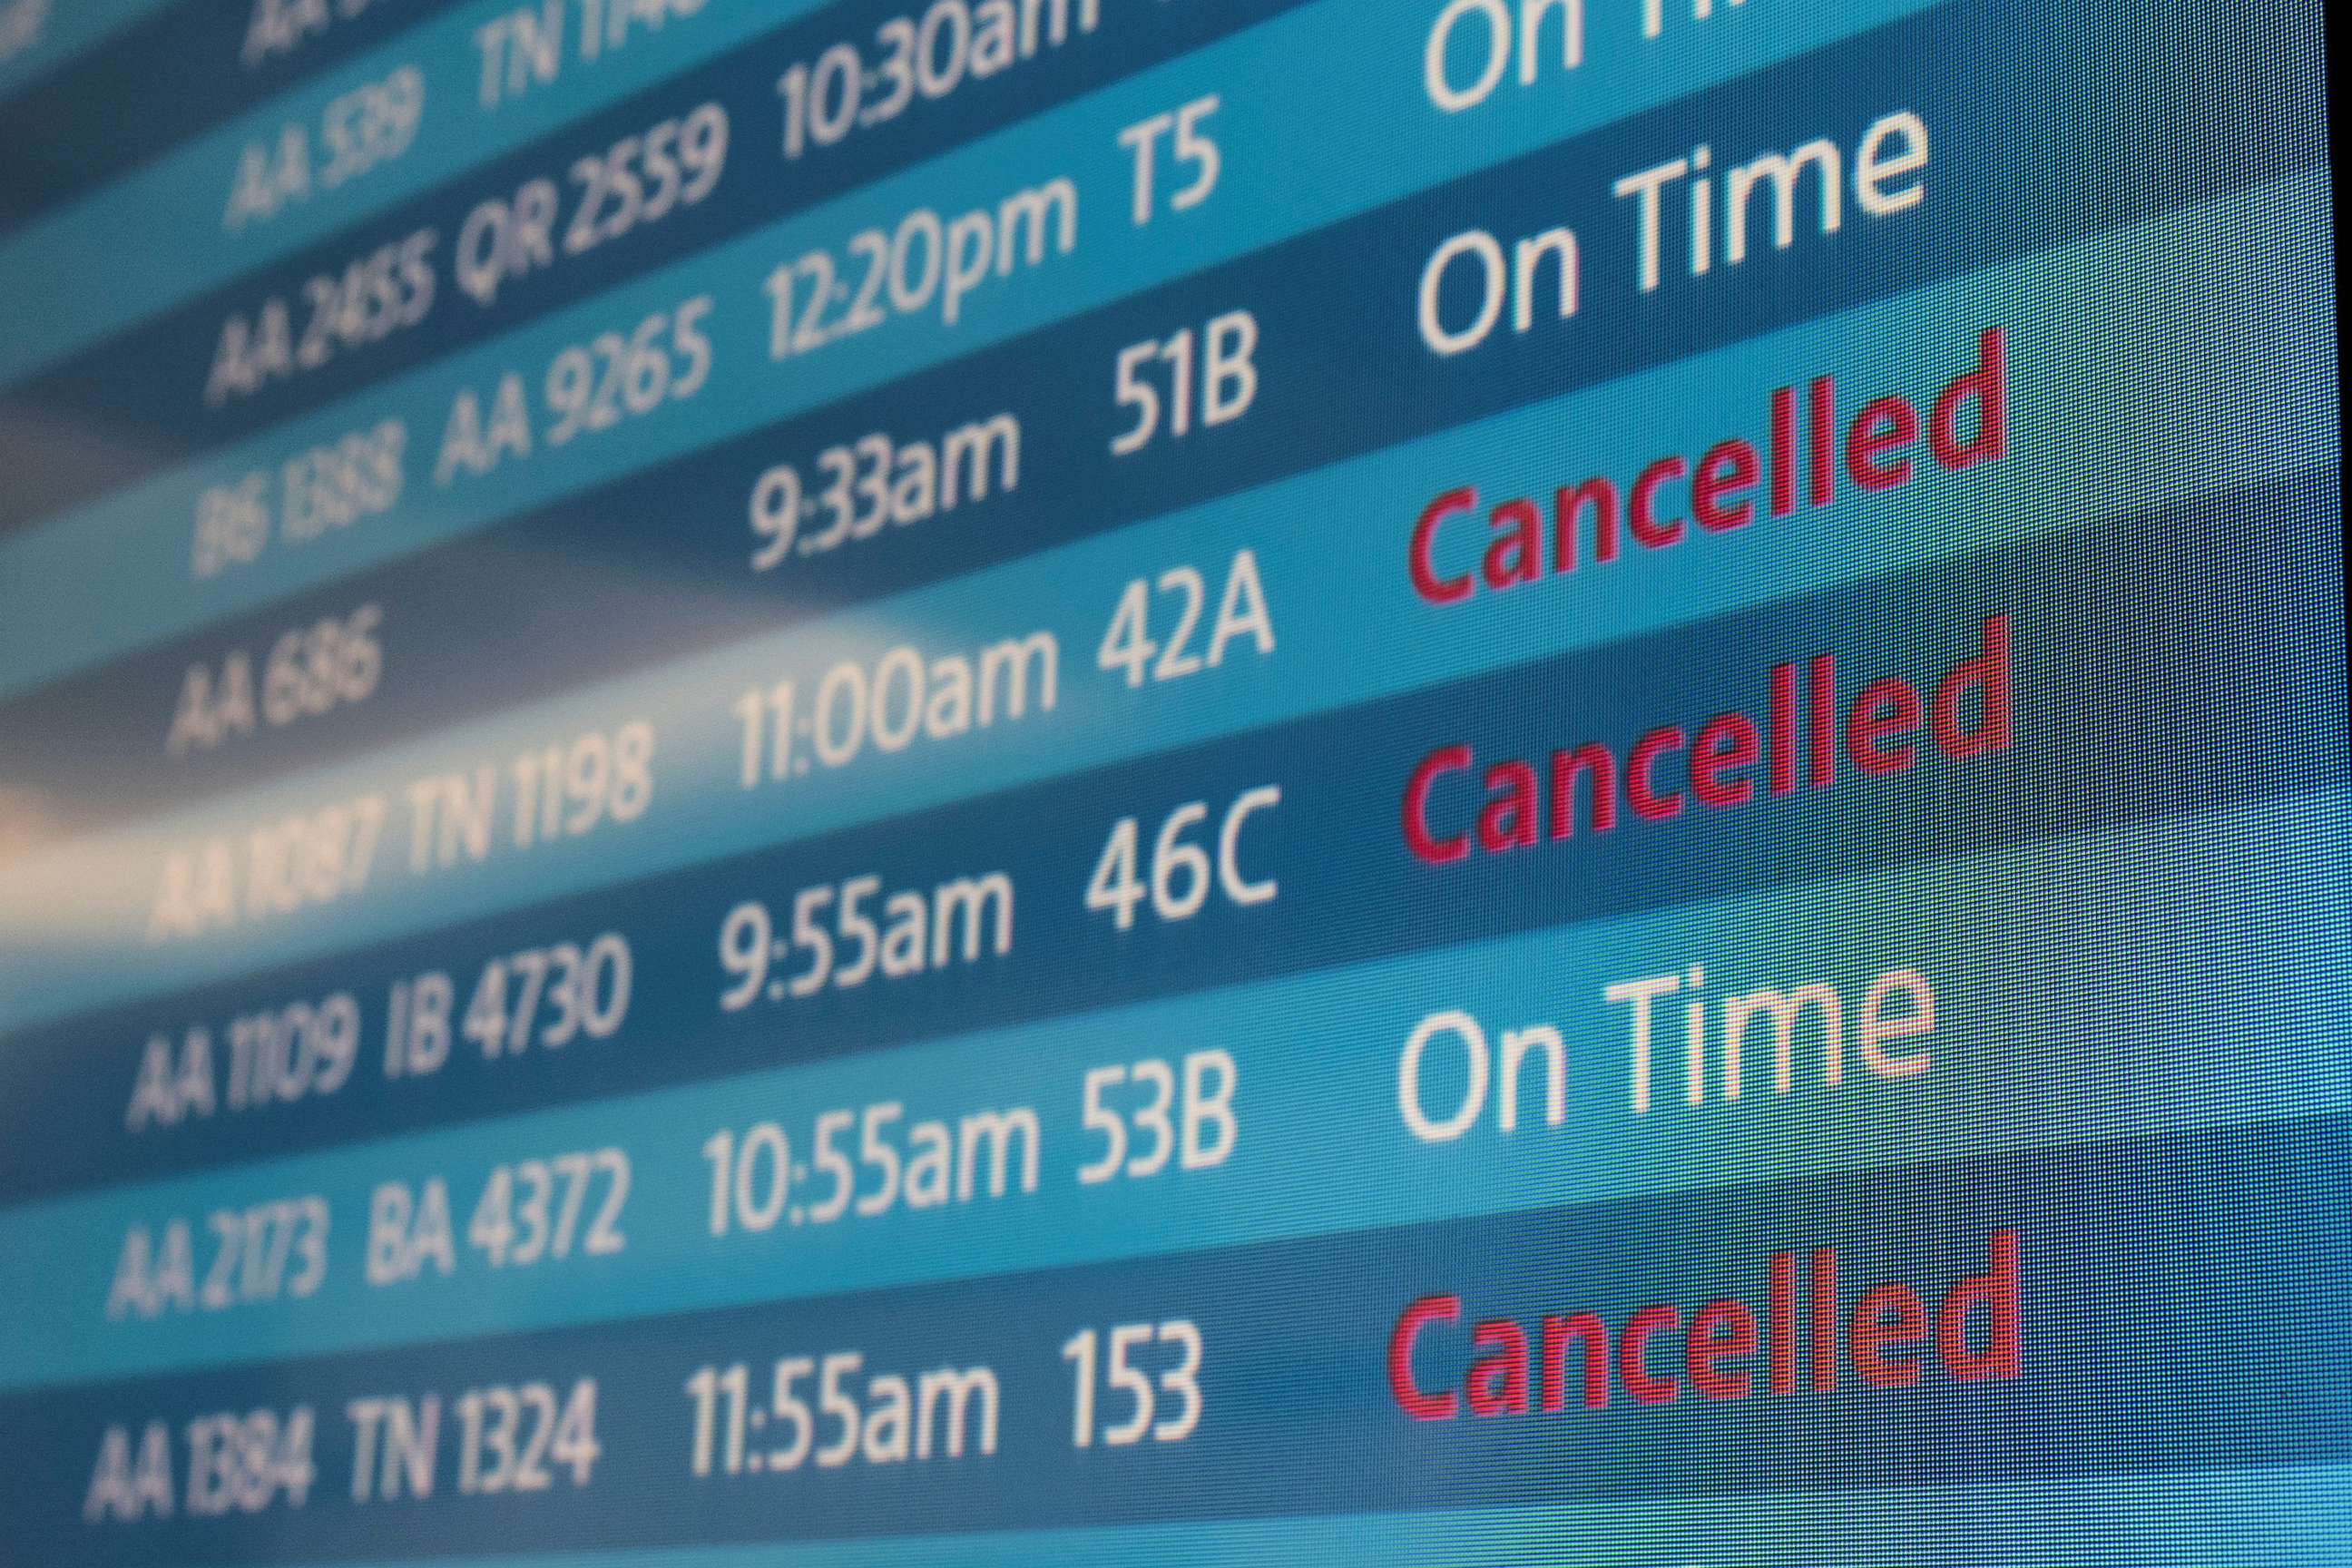 PHOTO: A screen shows cancelled flights at Los Angeles International Airport as more than 1,400 American Airlines flights over the weekend were cancelled due to staff shortages and unfavorable weather, Oct. 31, 2021, in Los Angeles.